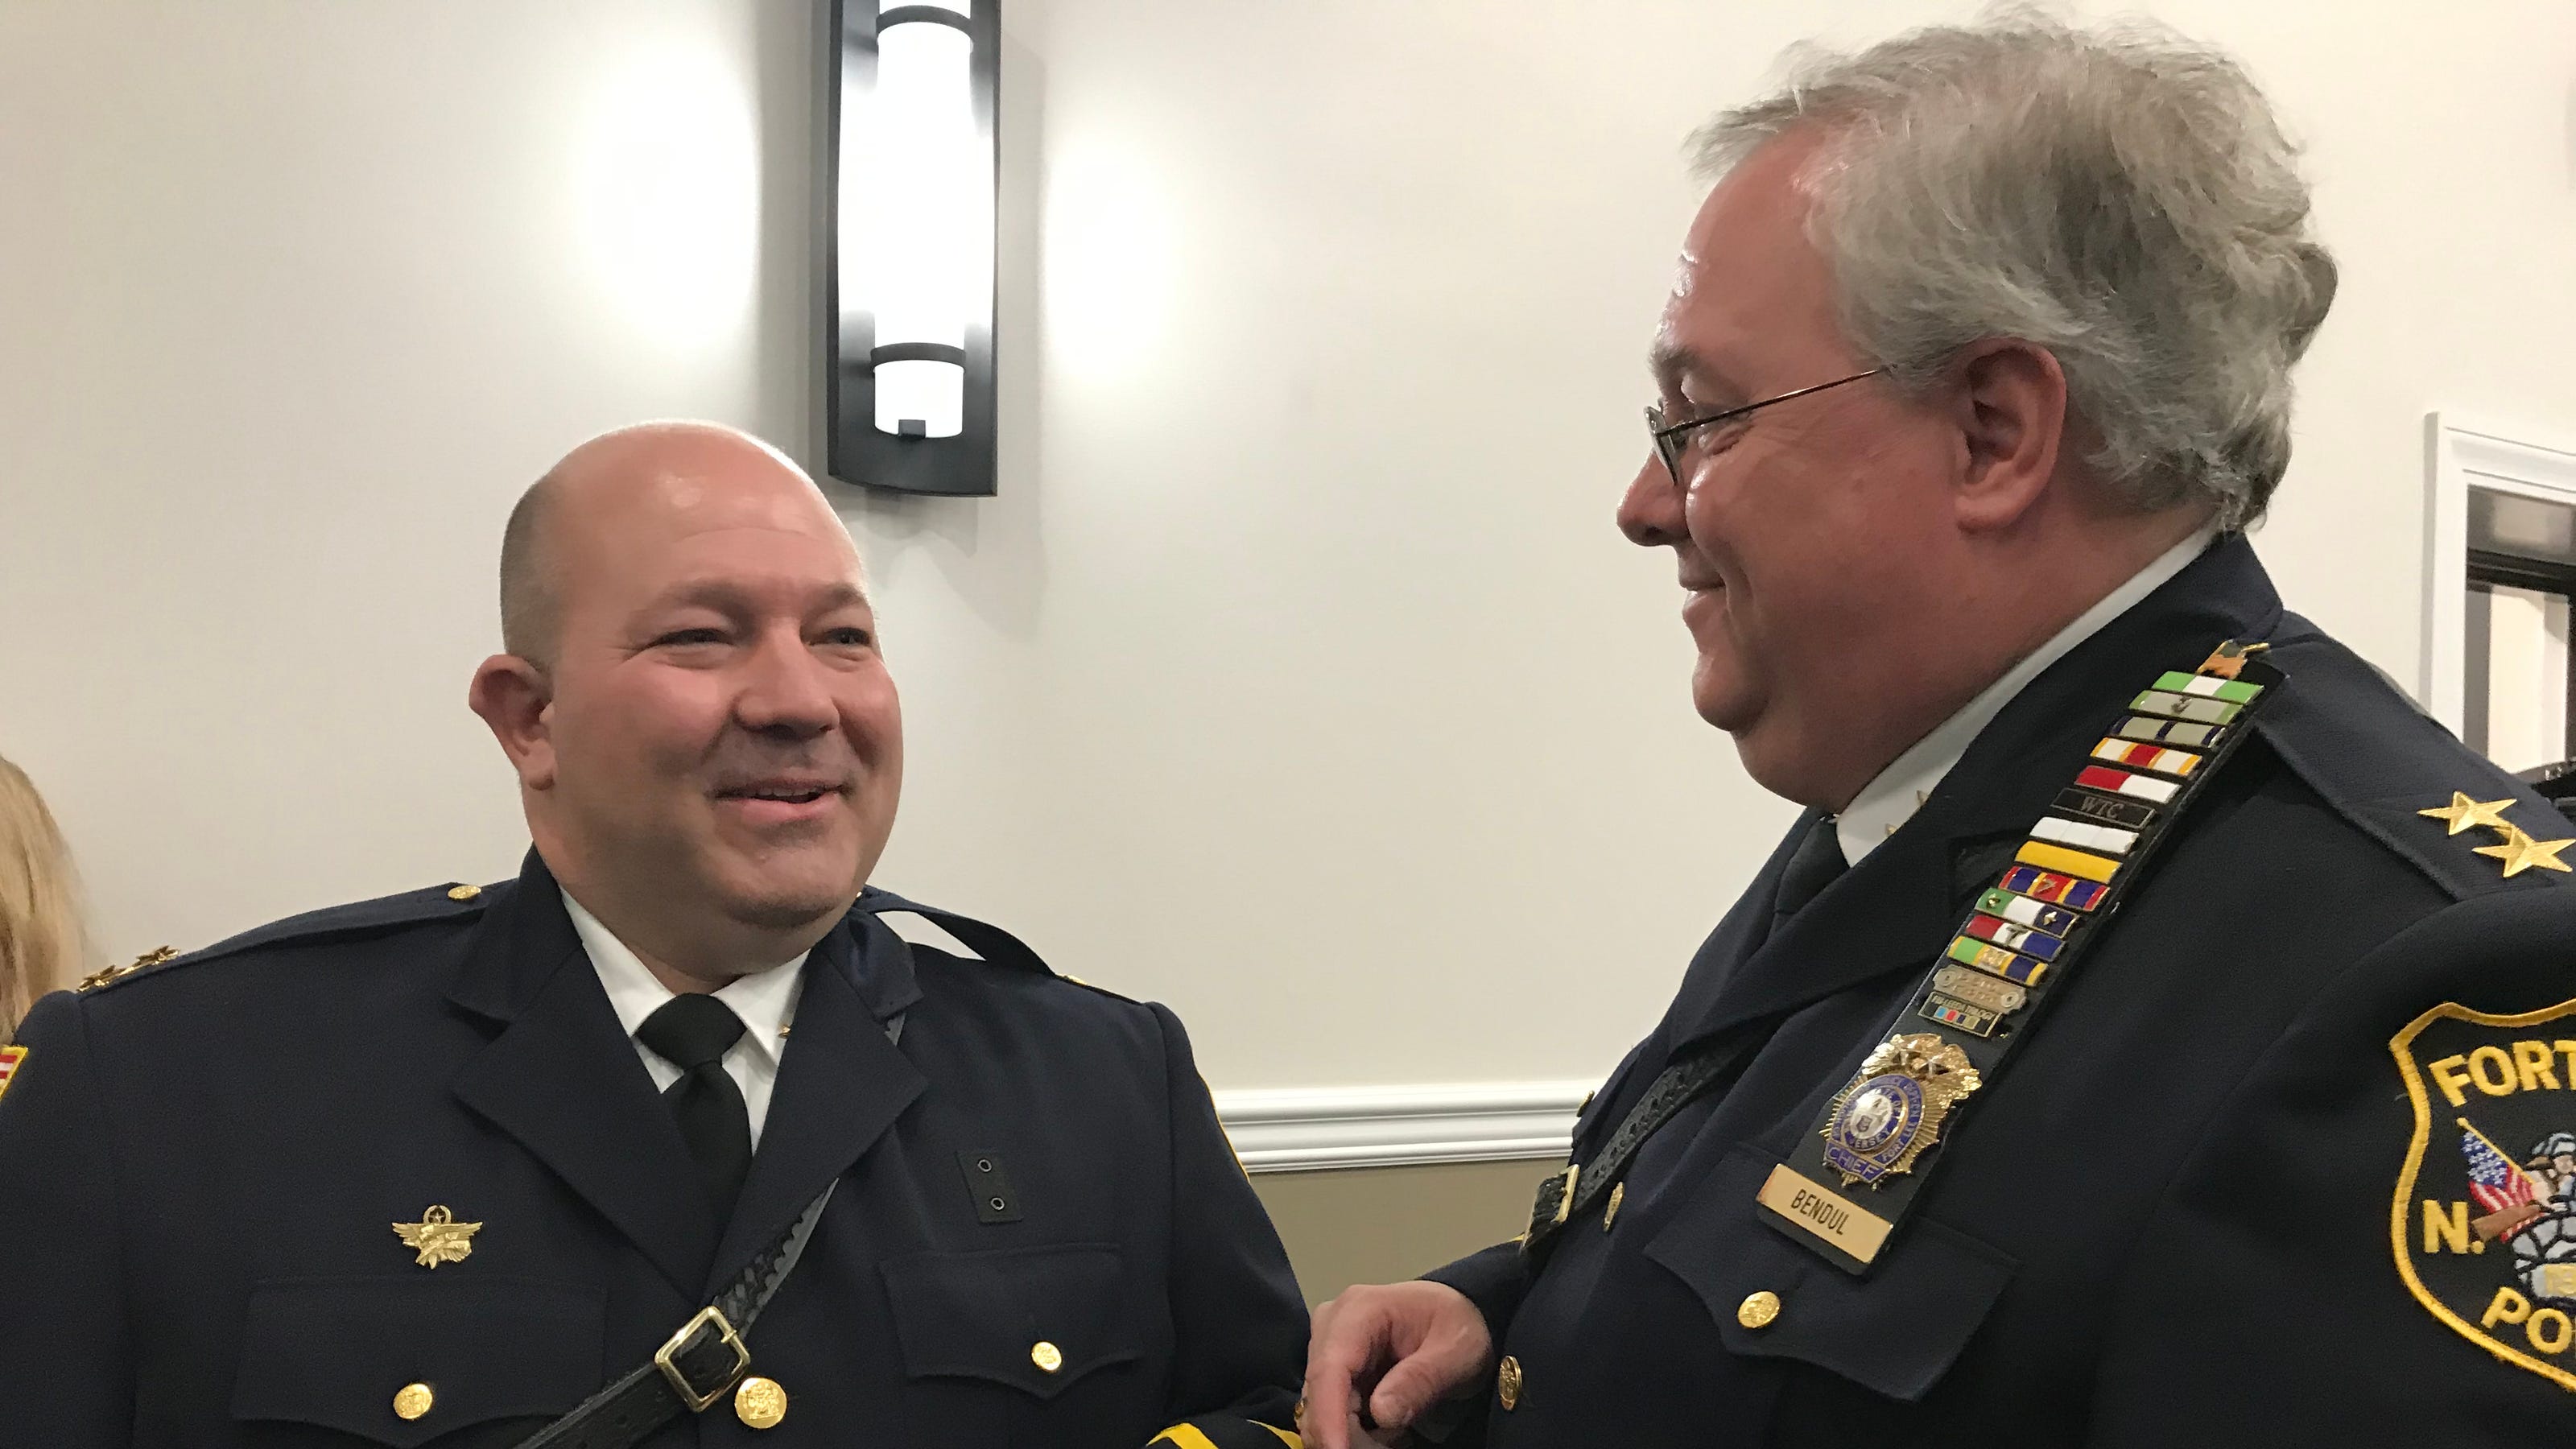 Matthew Hintze named Fort Lee NJ police chief for hometown department